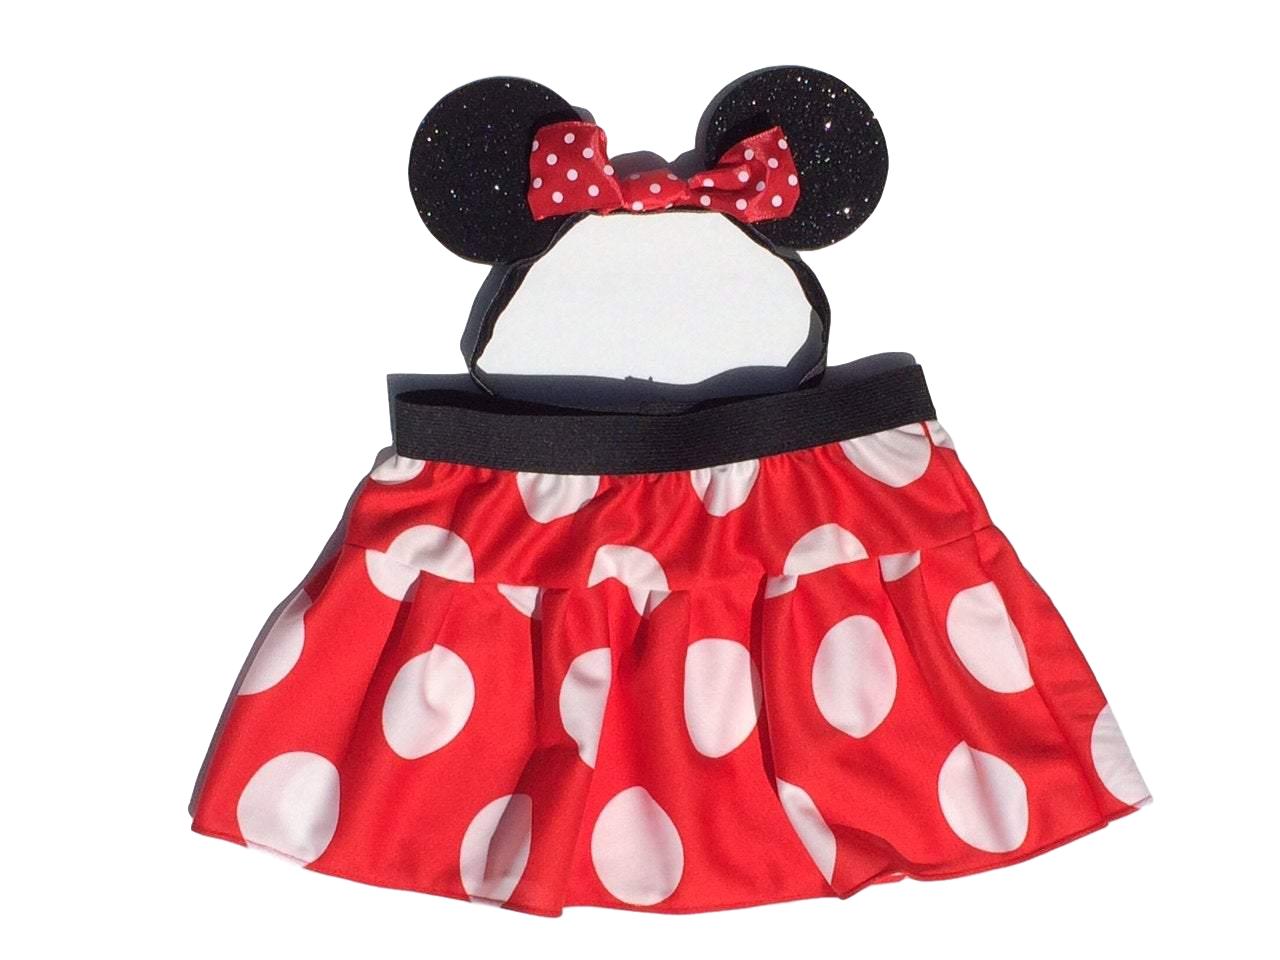 Mrs Mouse Skirt and Ears Costume - Rock City Skirts